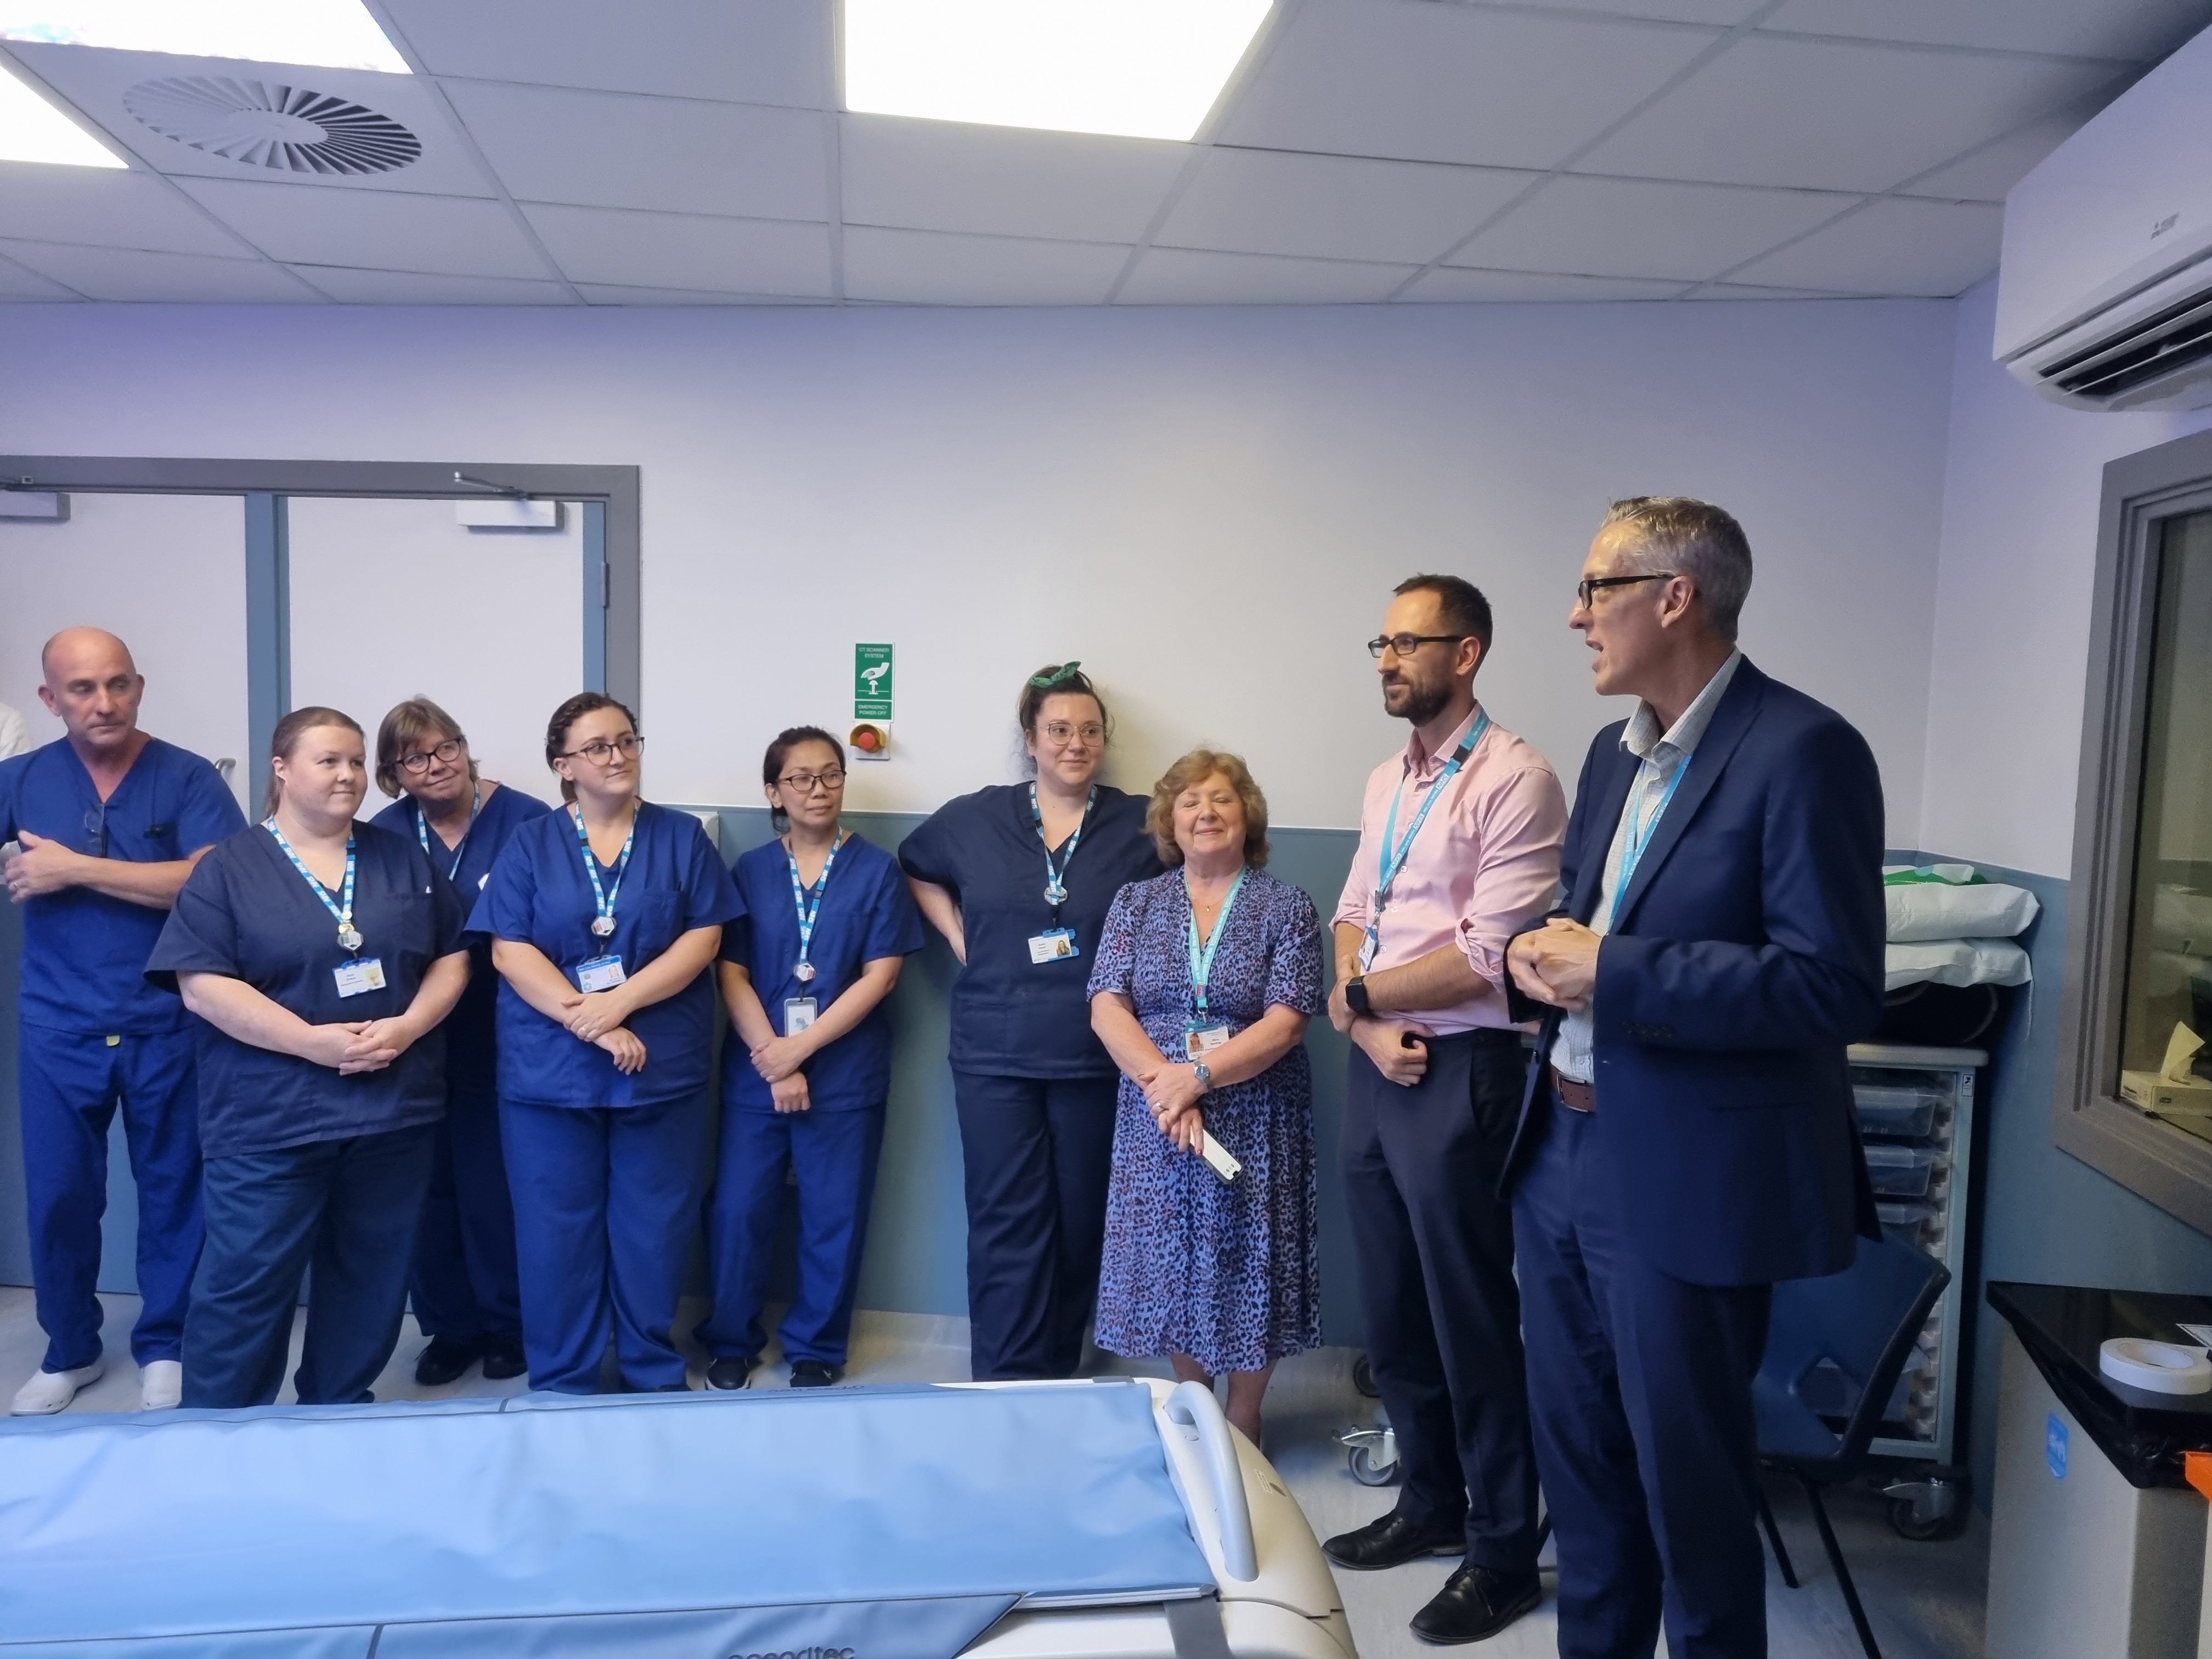 Members of the radiology team pictured with Chief Executive, Simon Constable and Chief Operating Officer, Dan Moore at the unveiling of the new CT scanner in the Warrington Hospital Emergency Department